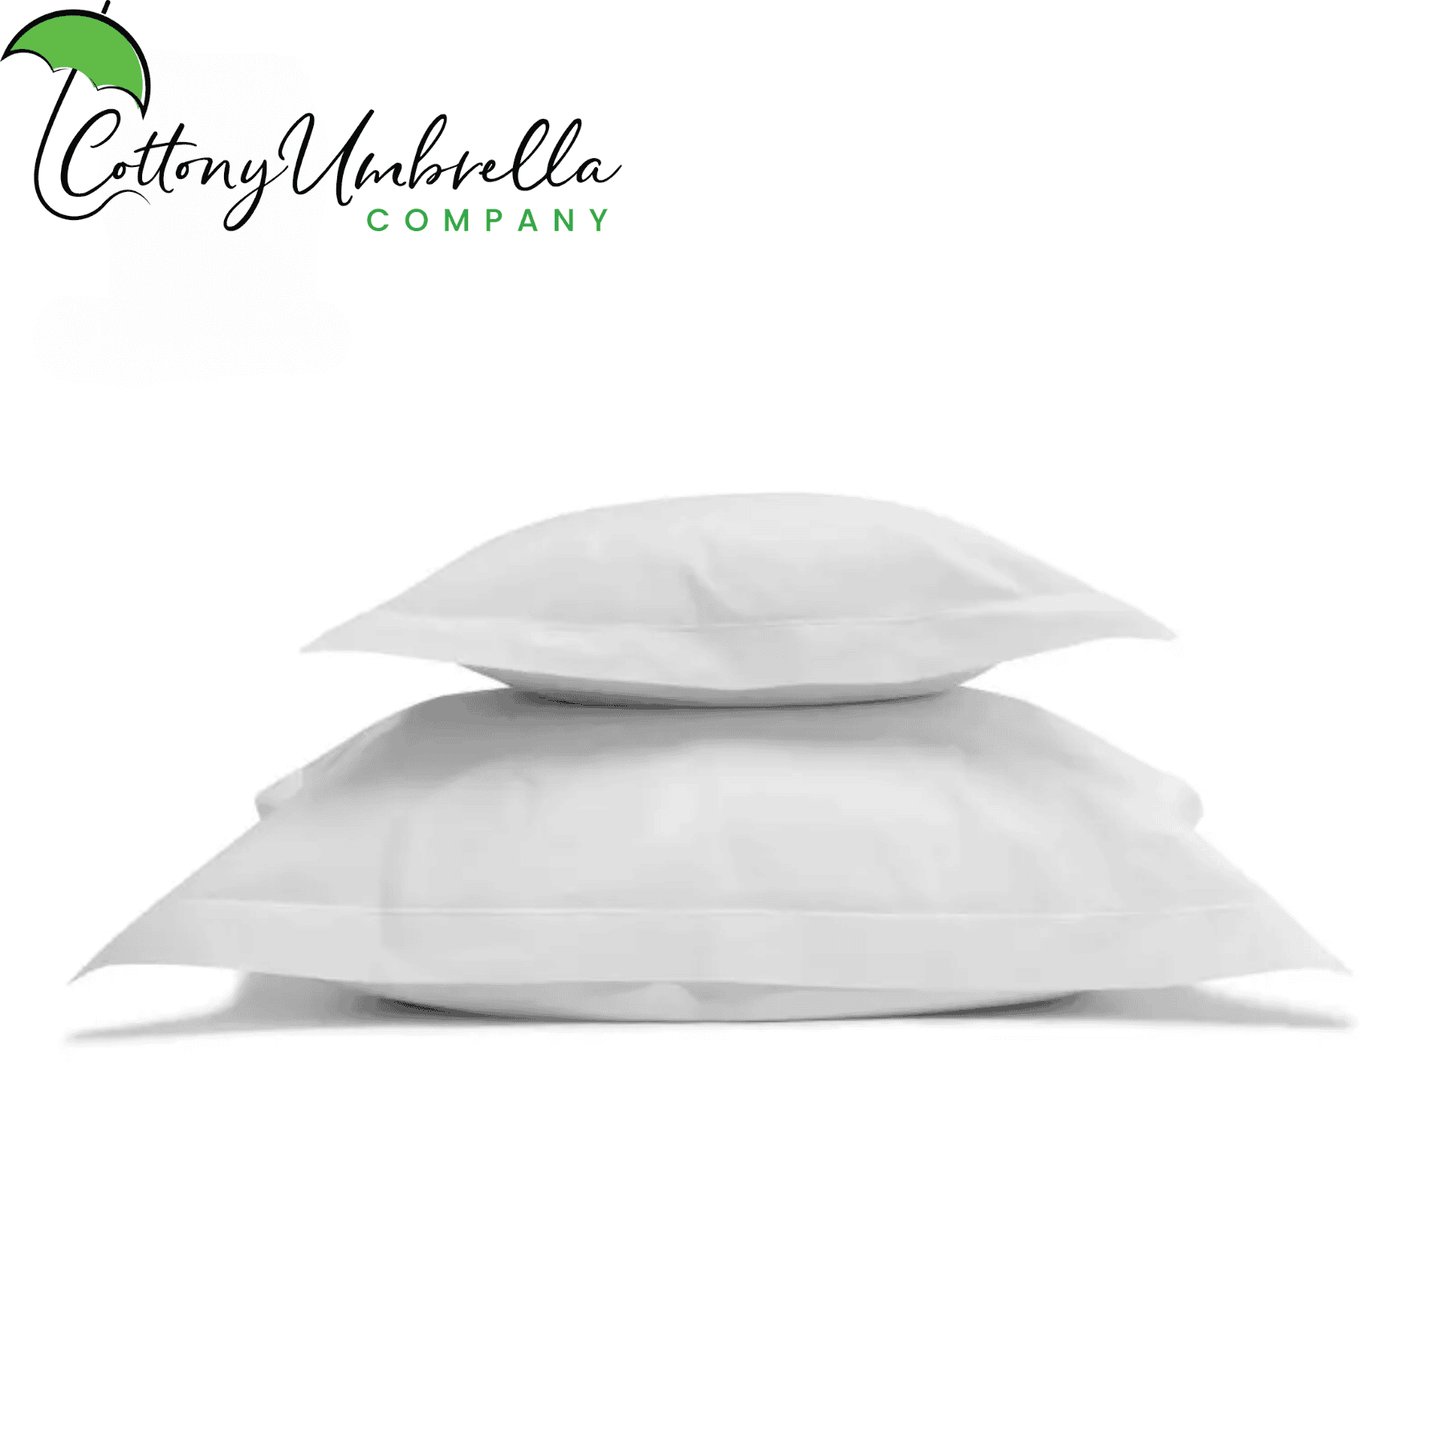 ULTRA-SOFT MICROFIBER PILLOW PROTECTOR, ENVELOPE AND ZIPPER STYLE